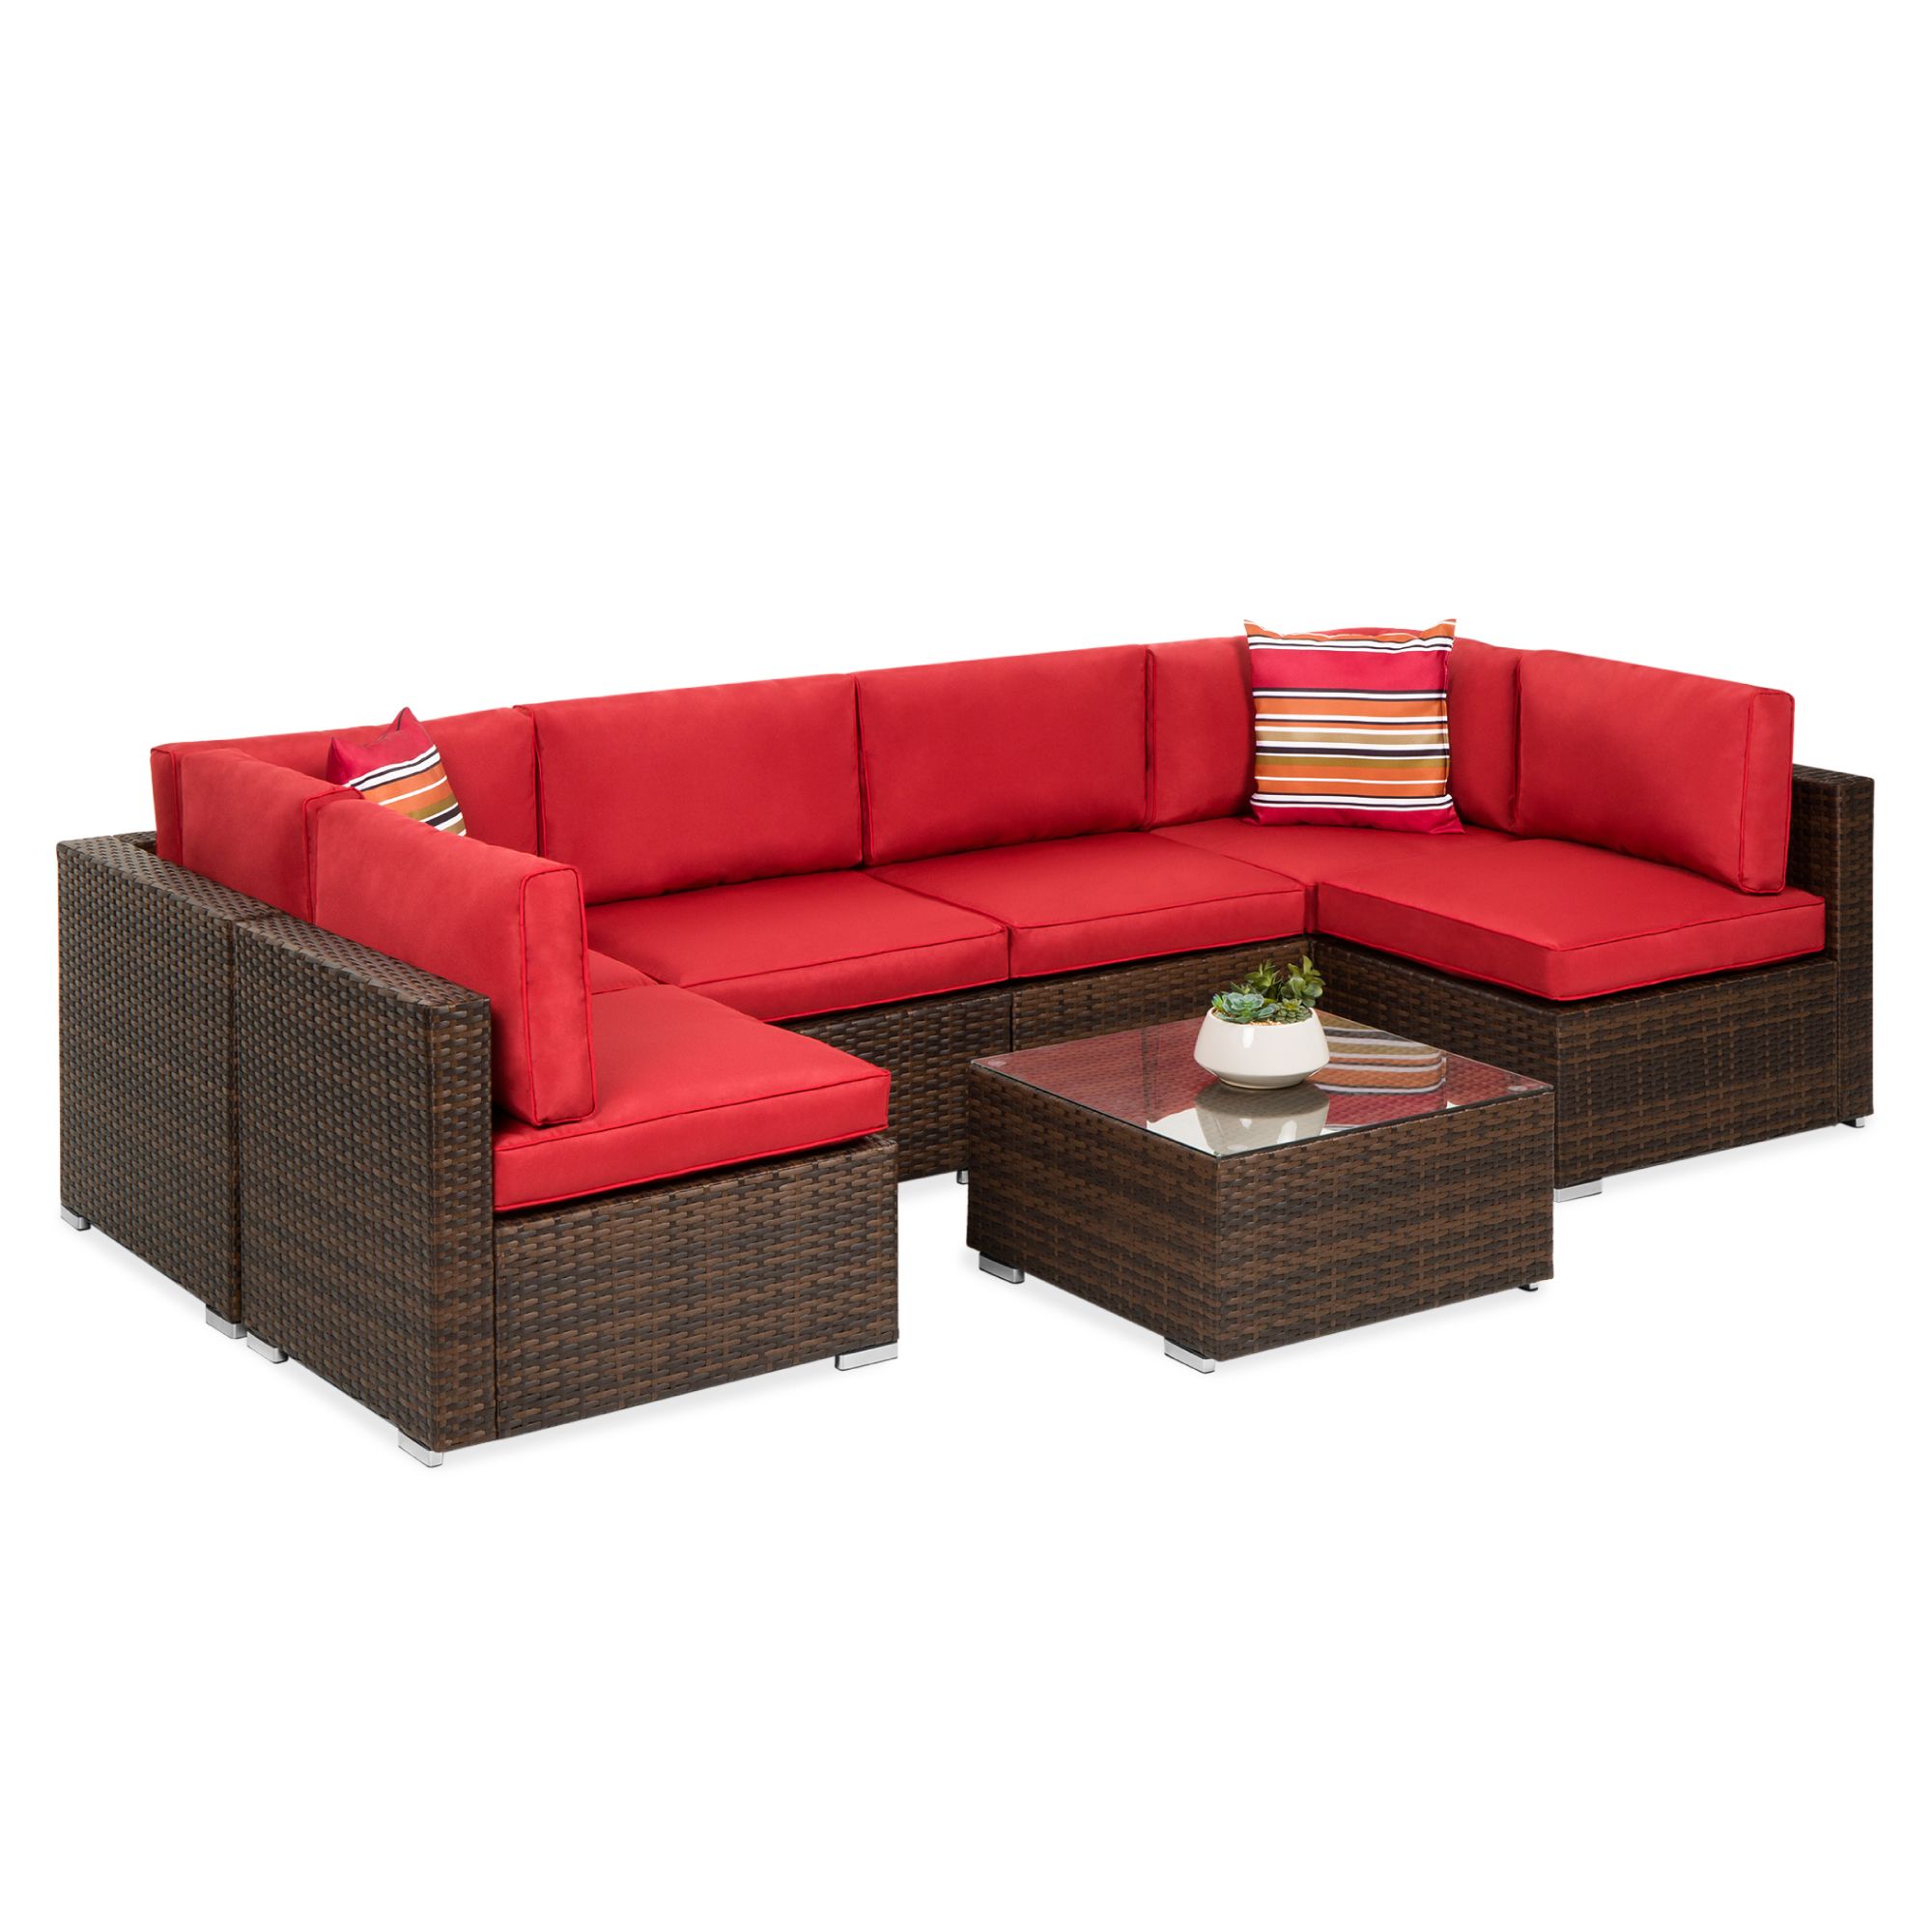 Best Choice Products 7 Piece Modular Outdoor Conversational Furniture Inside Rustic Brown Sectional Corner Desks (View 10 of 15)